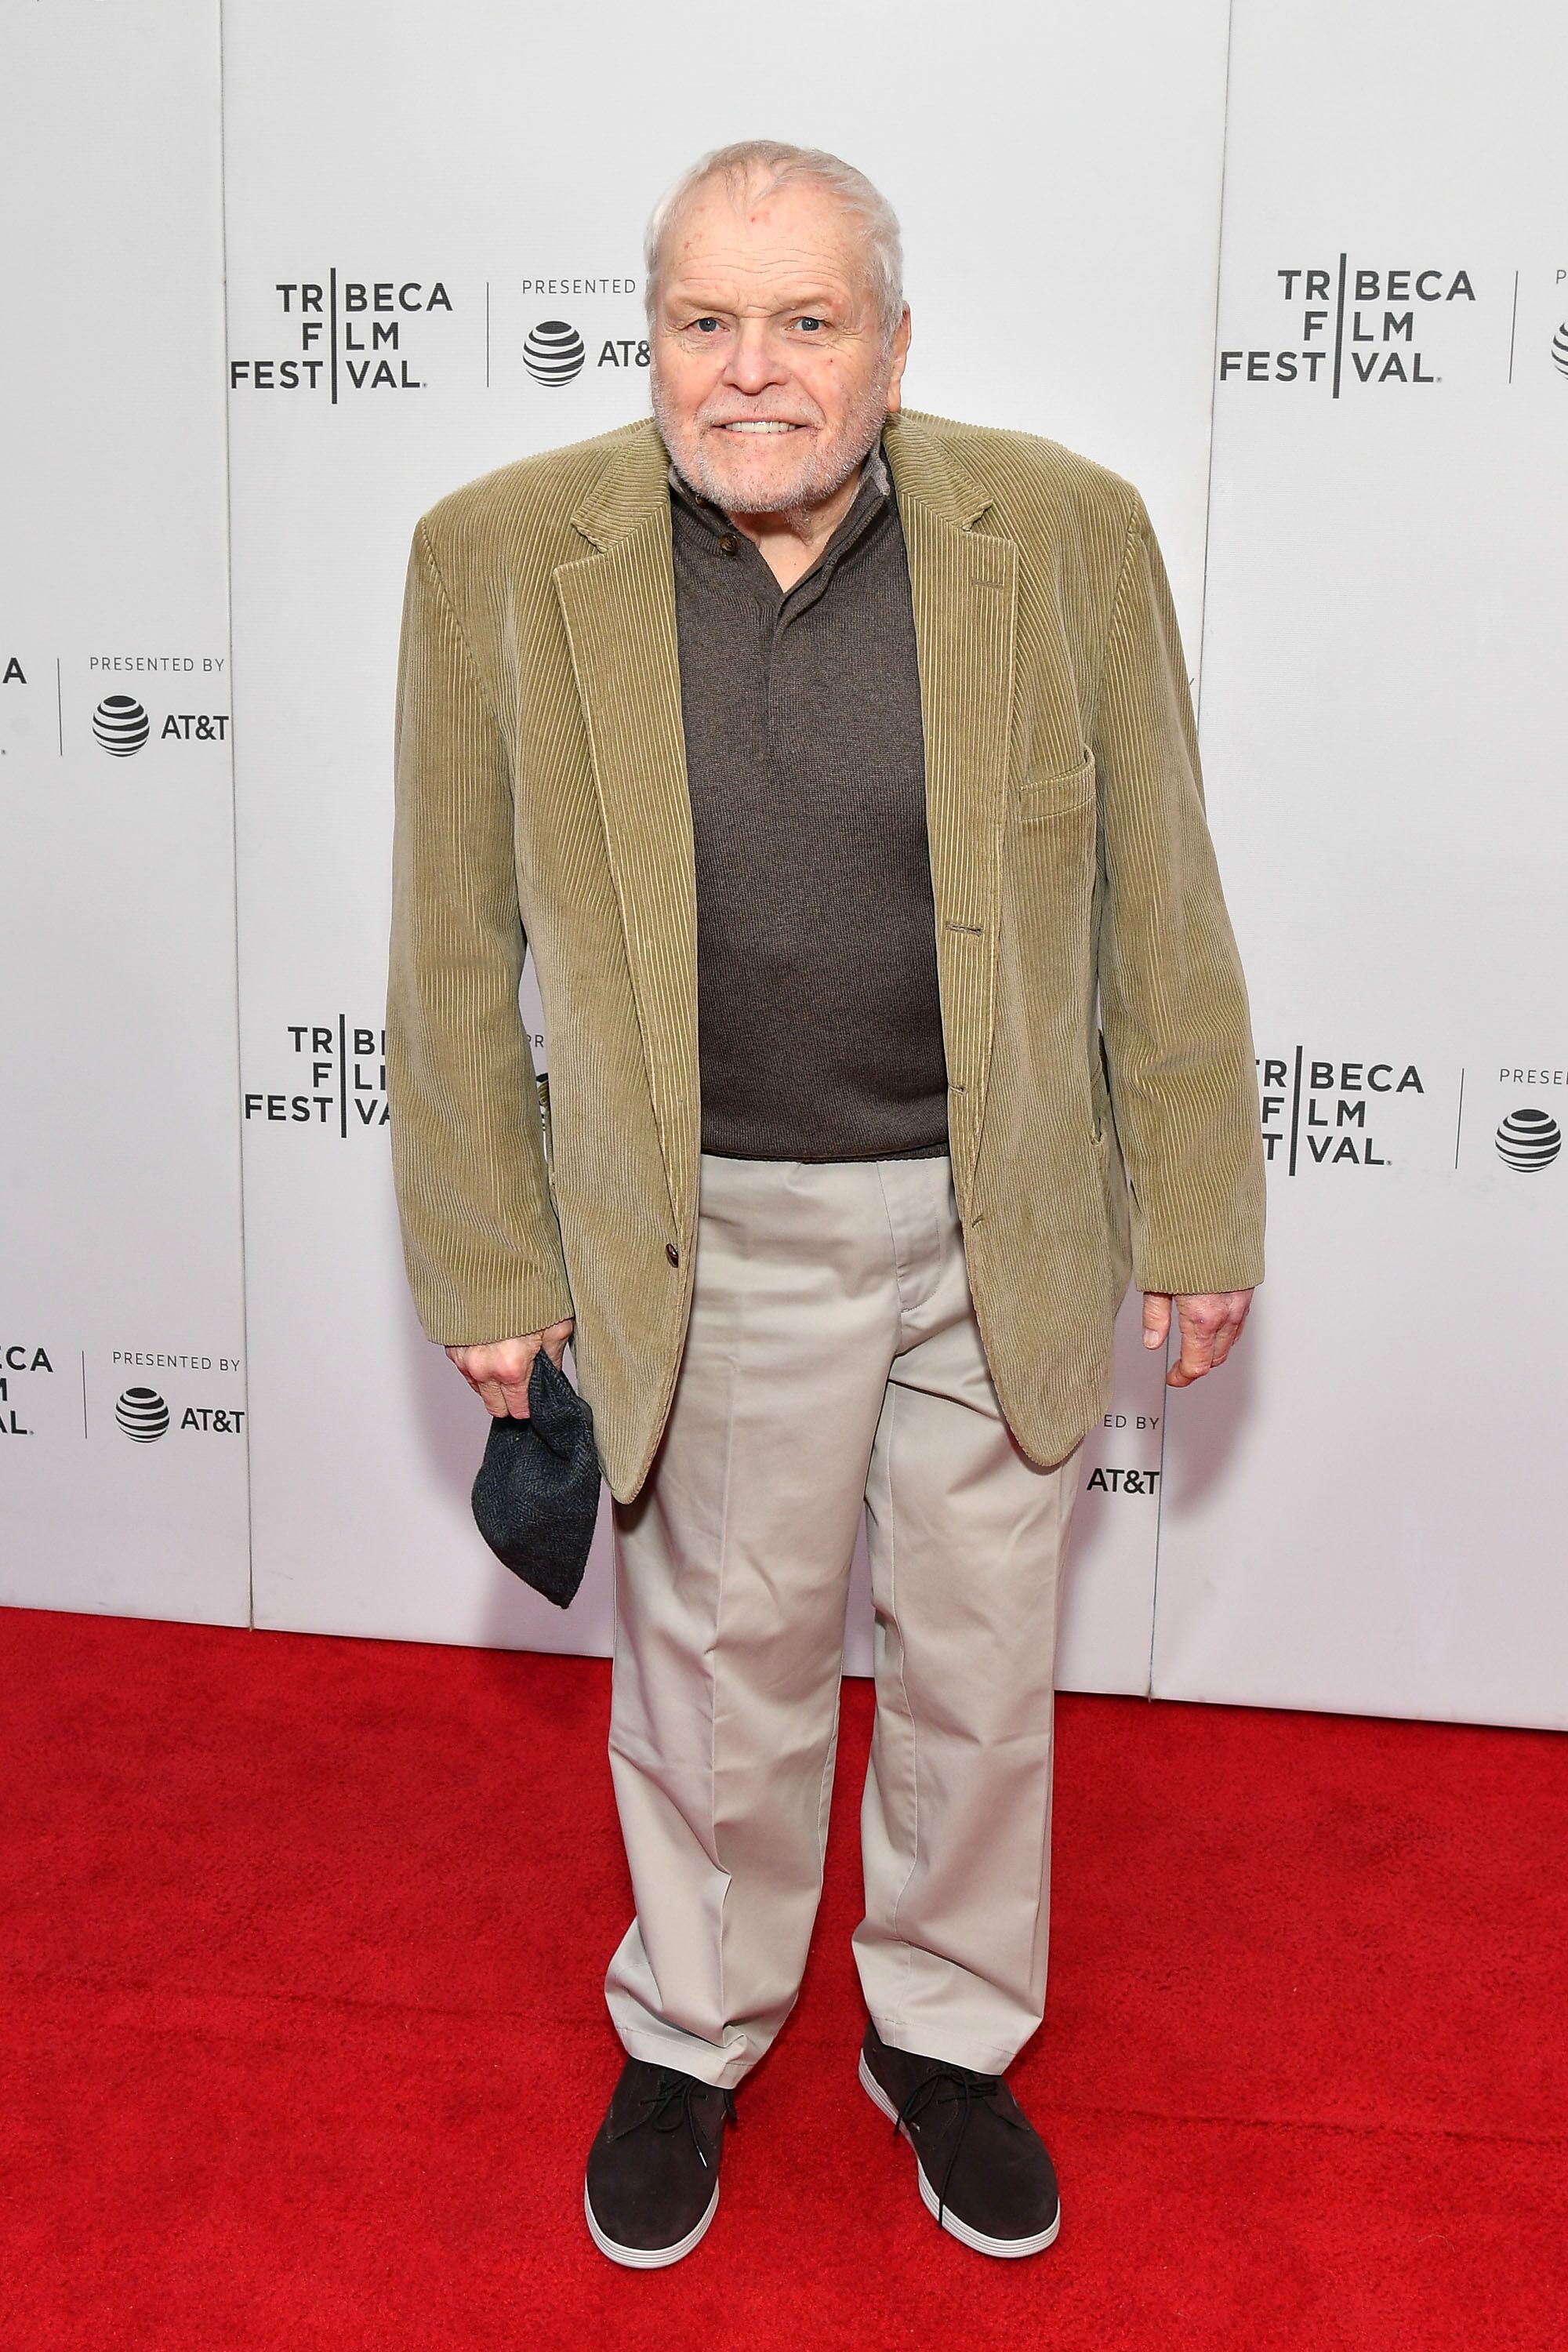 Brian Dennehy attends the "Driveways" screening during the 2019 Tribeca Film Festival at Village East Cinema on April 30, 2019 in New York City | Photo: Getty Images